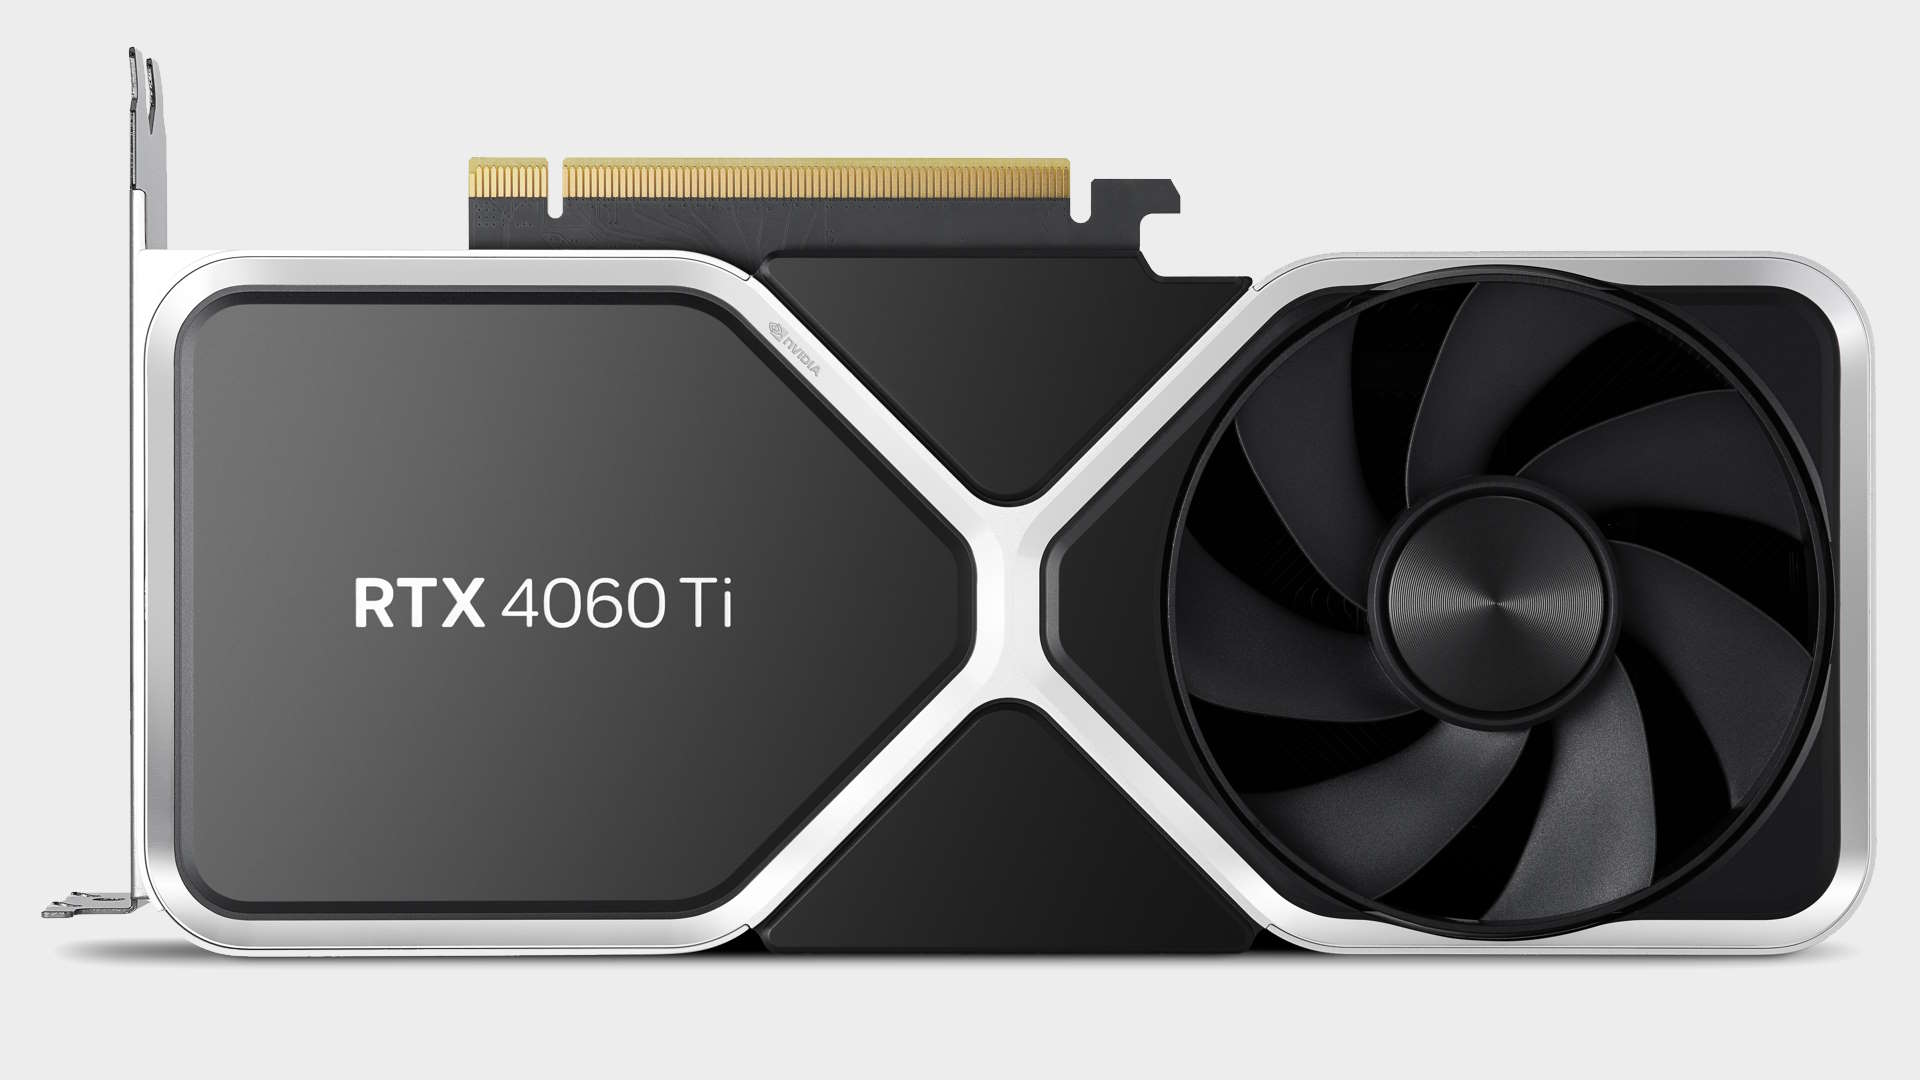 Nvidia GeForce RTX 4060 Ti 16GB Review: Does More VRAM Help?